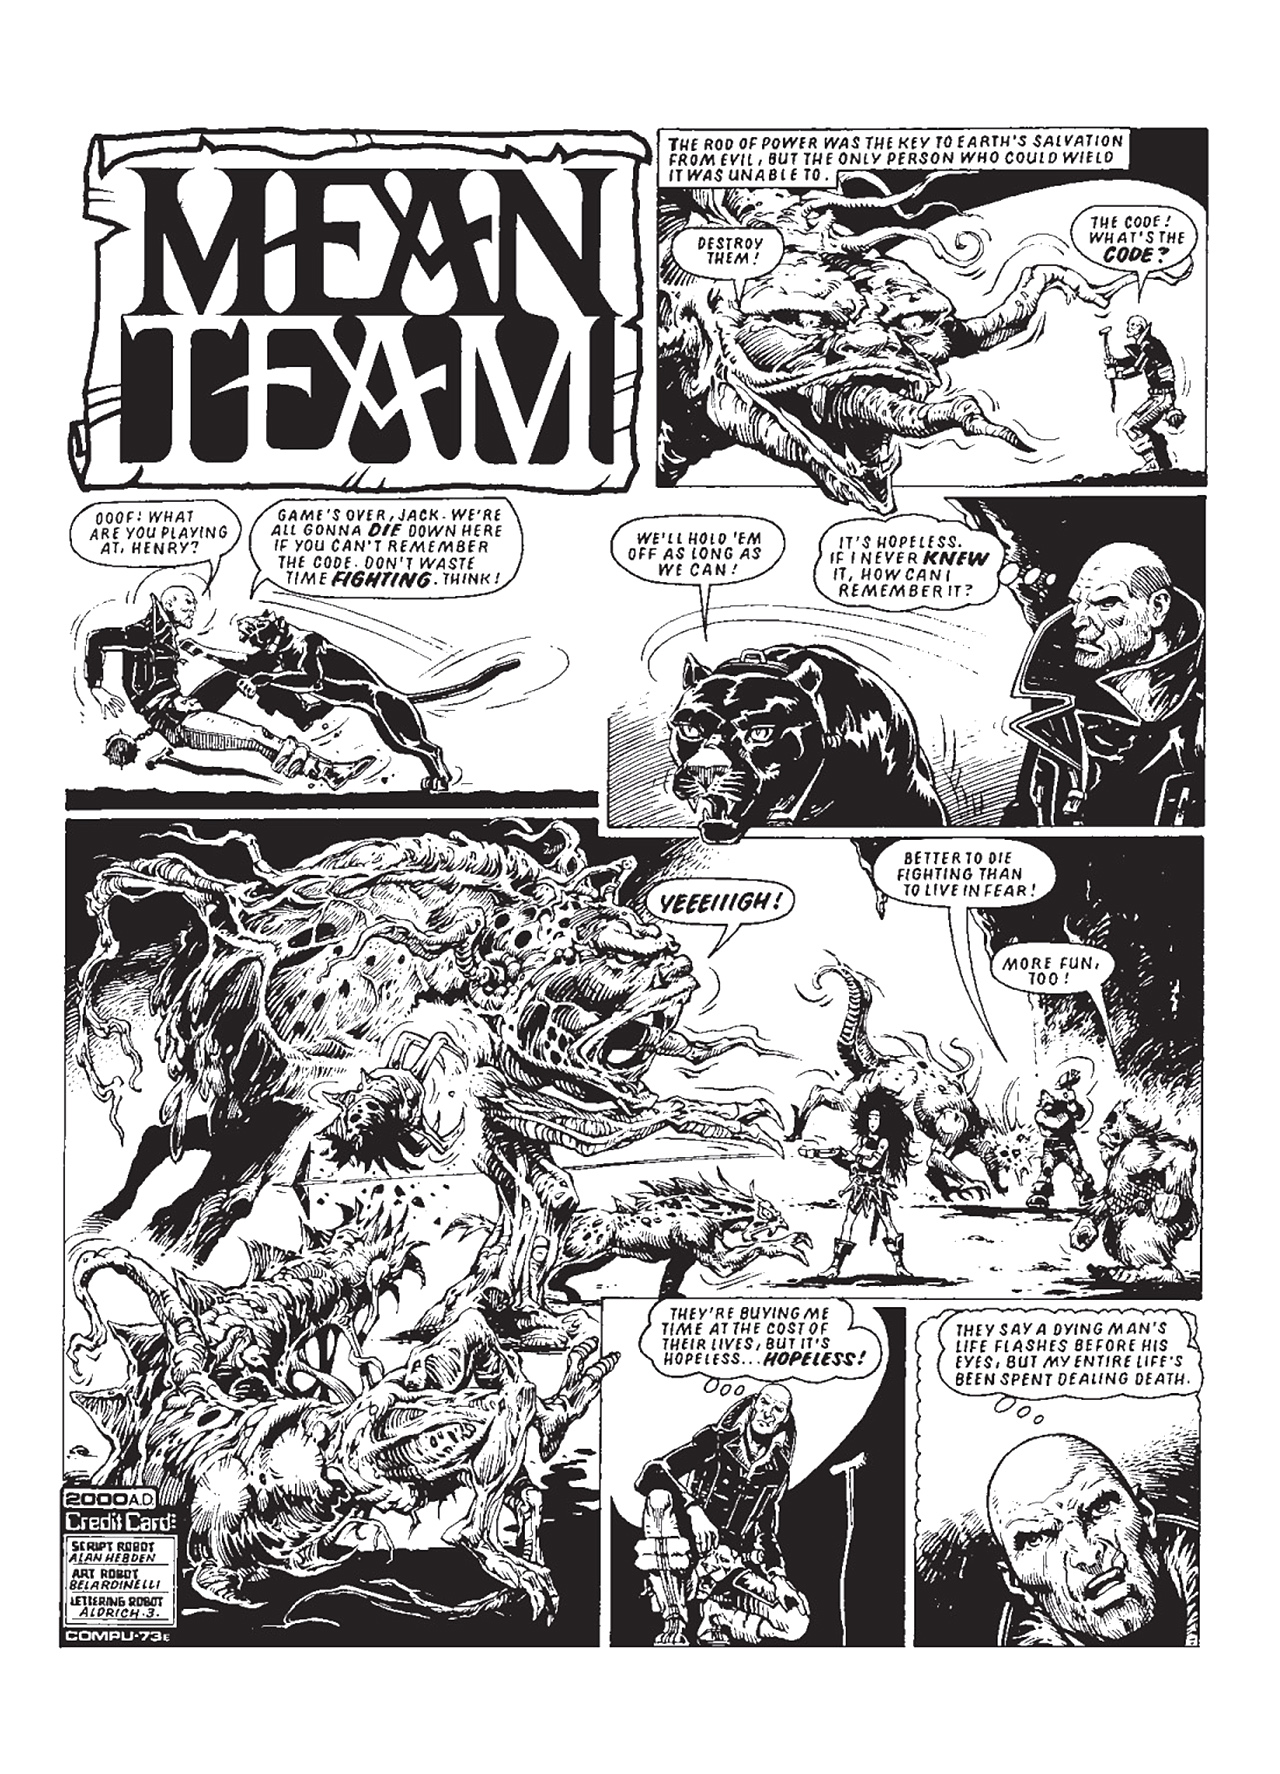 Read online Mean Team comic -  Issue # TPB - 163